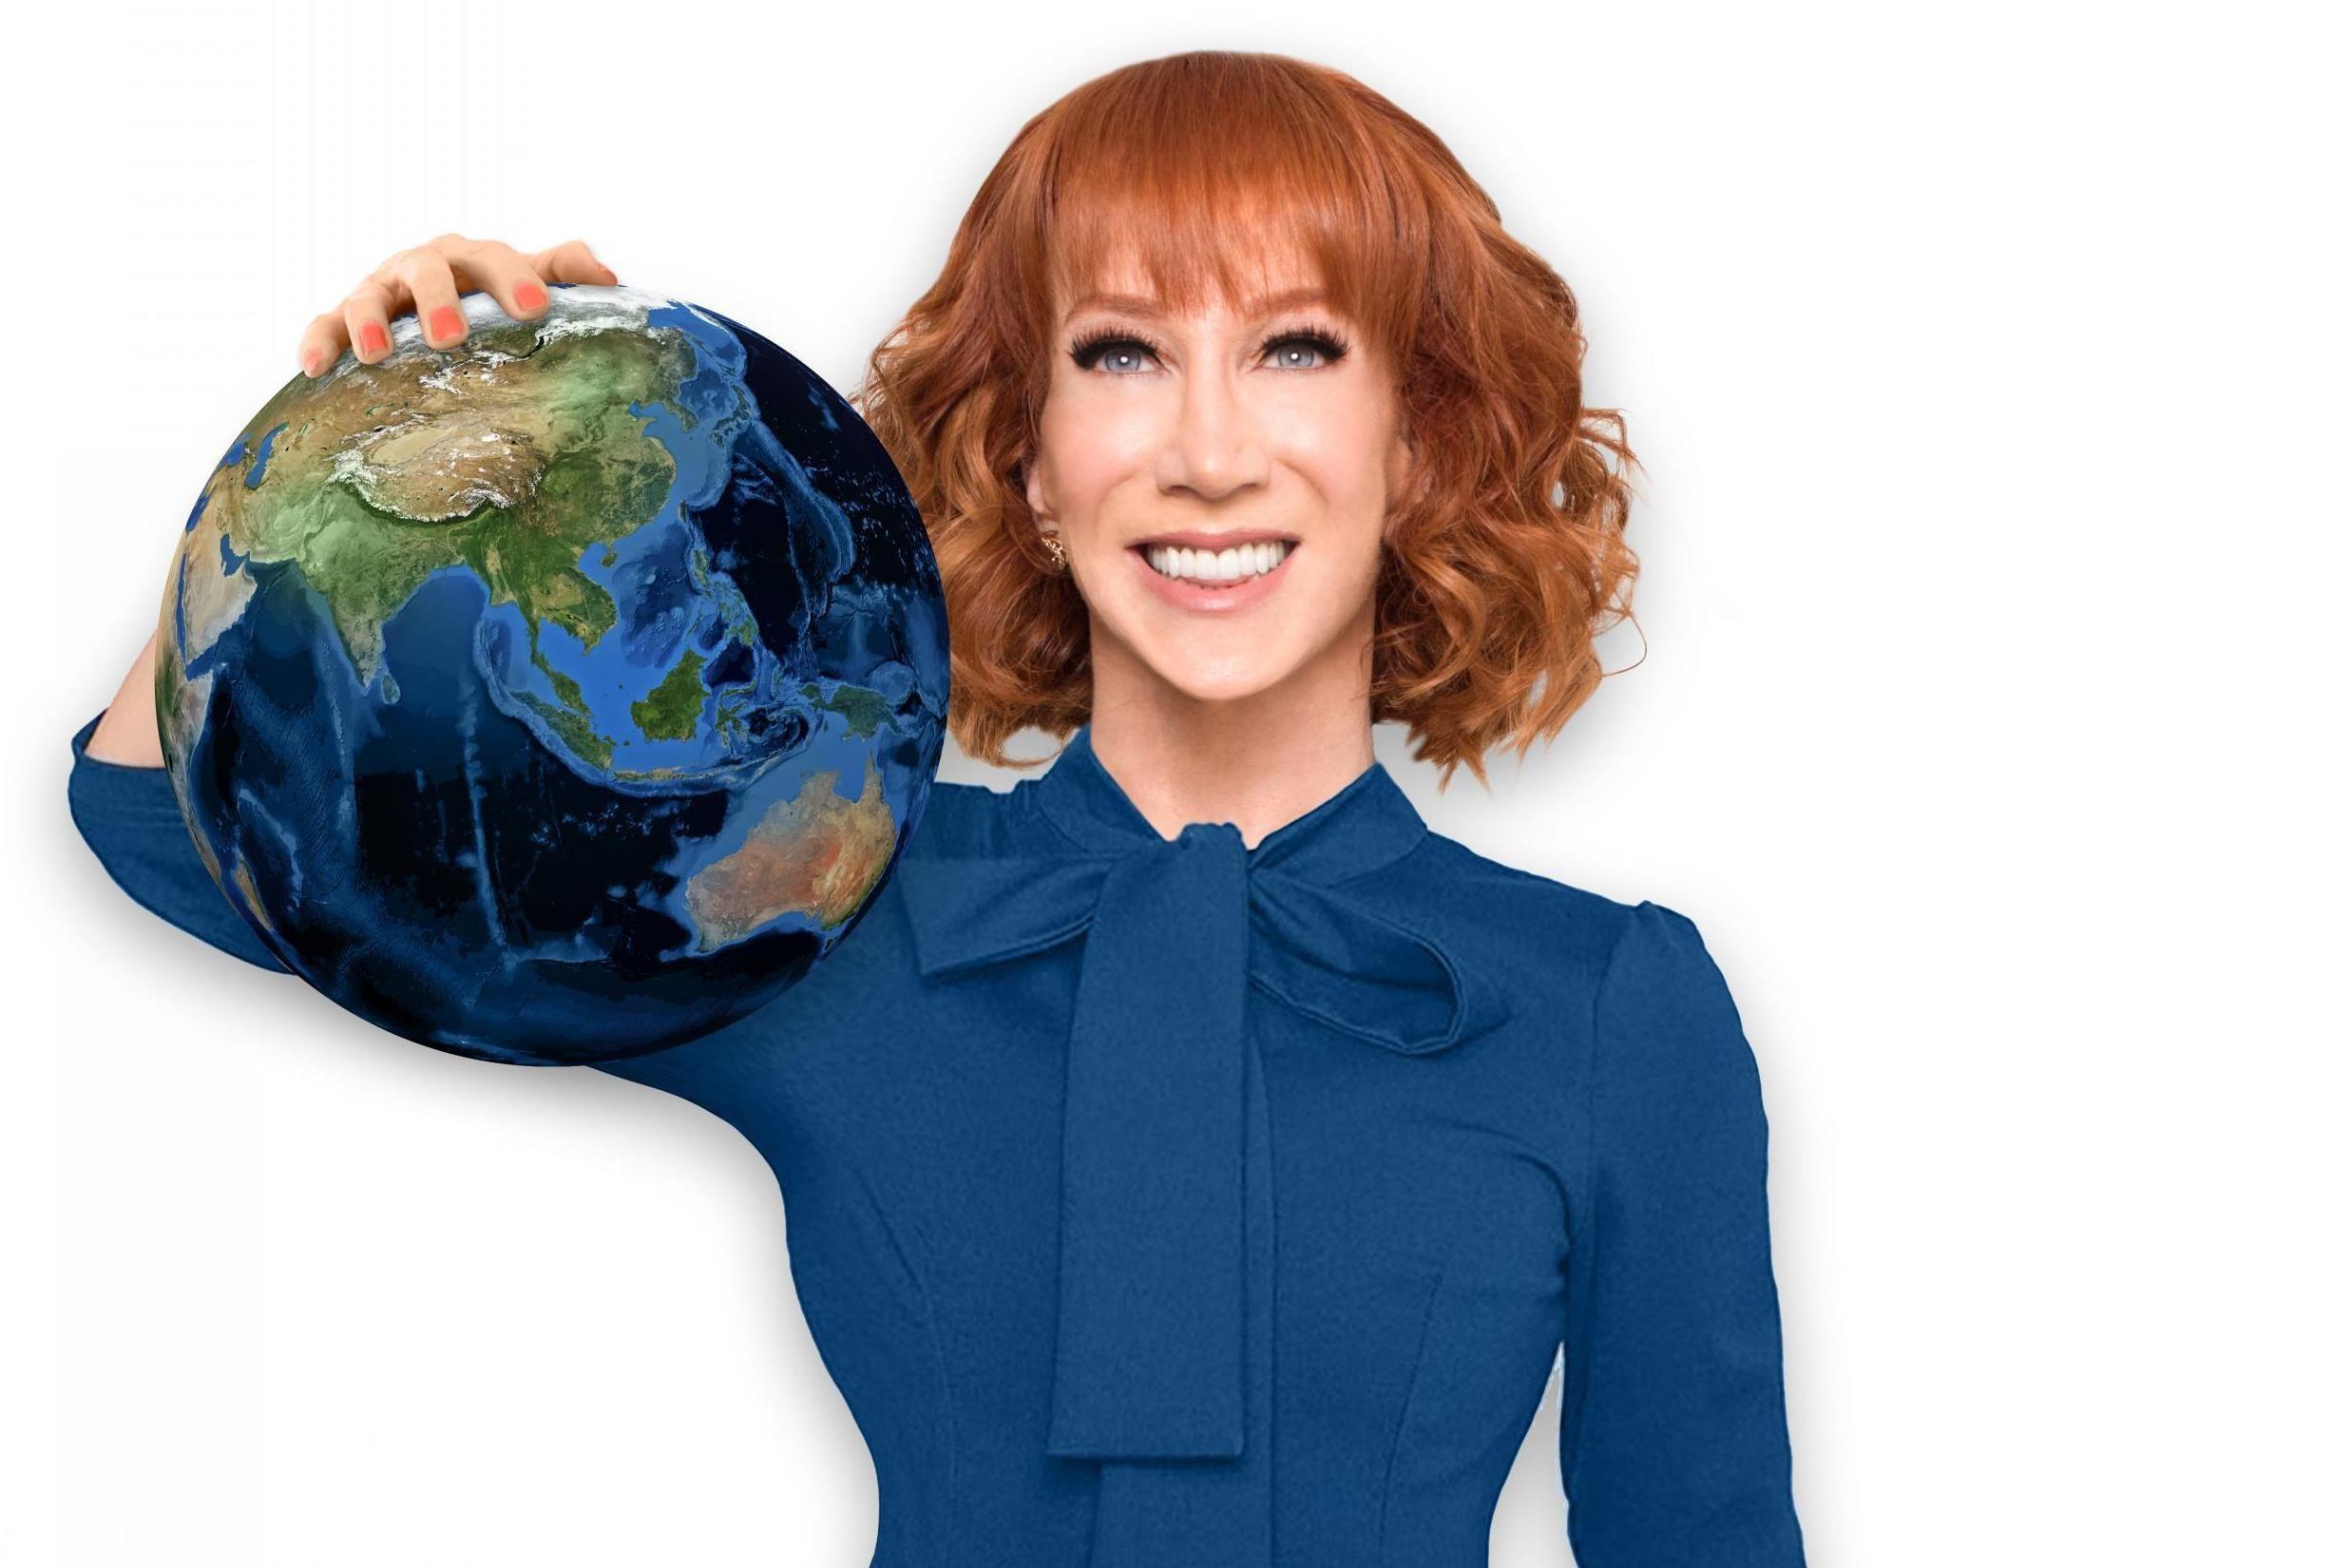 Kathy Griffin is coming to London to talk about her controversial